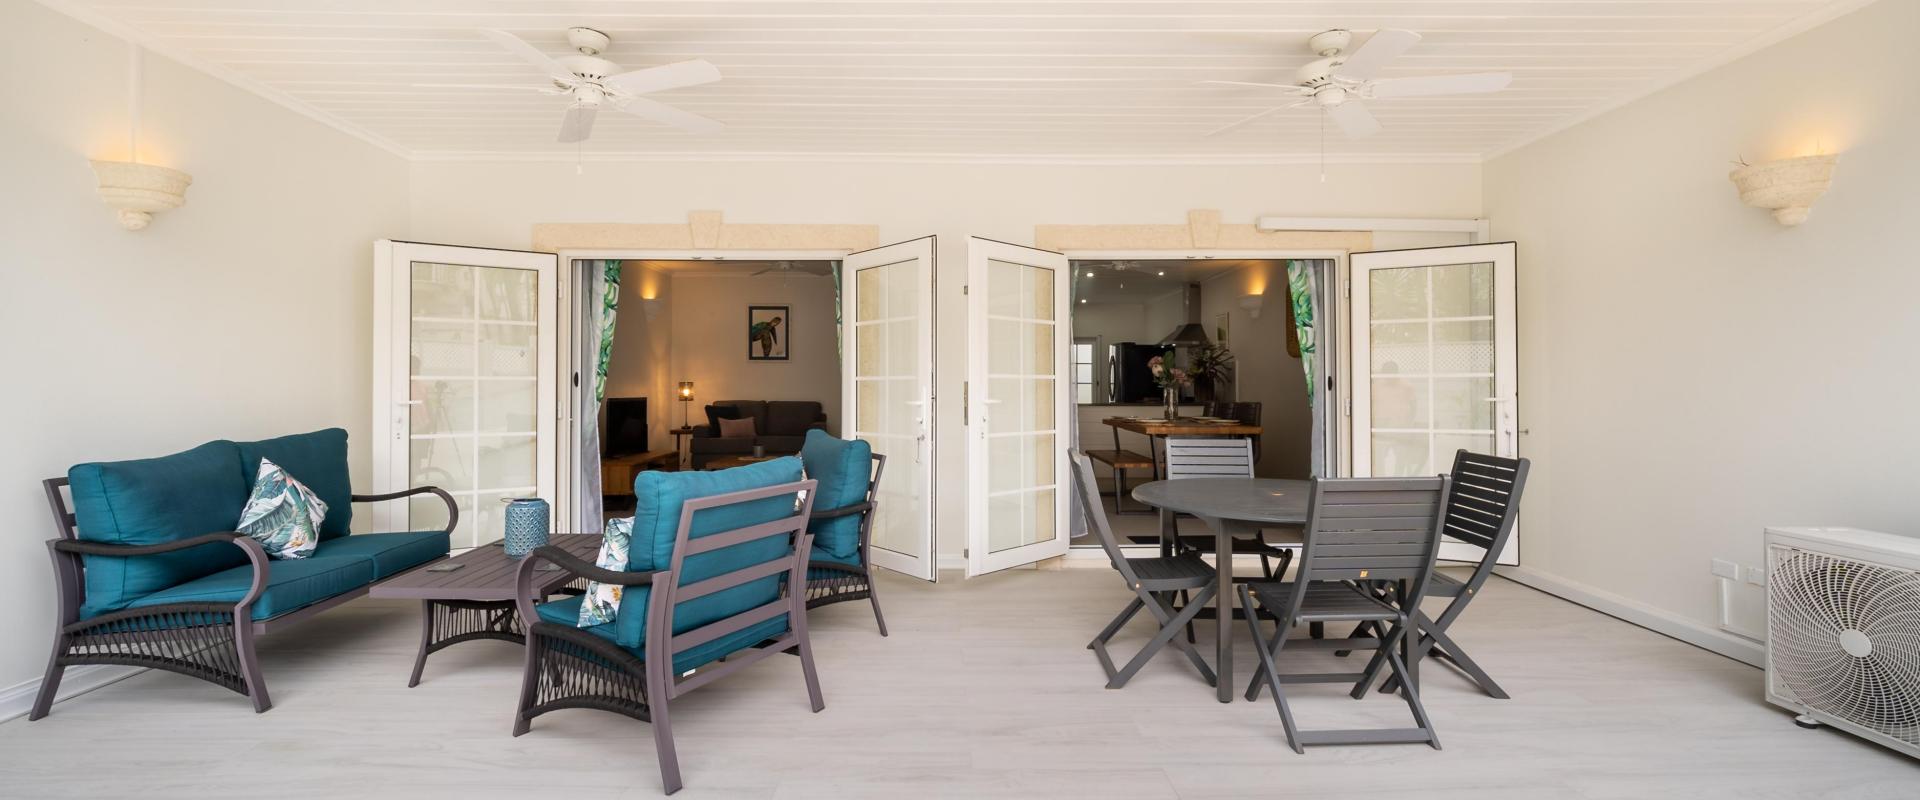 Porters Gate 19 Holiday Rental St. James Barbados Covered Patio with Seating